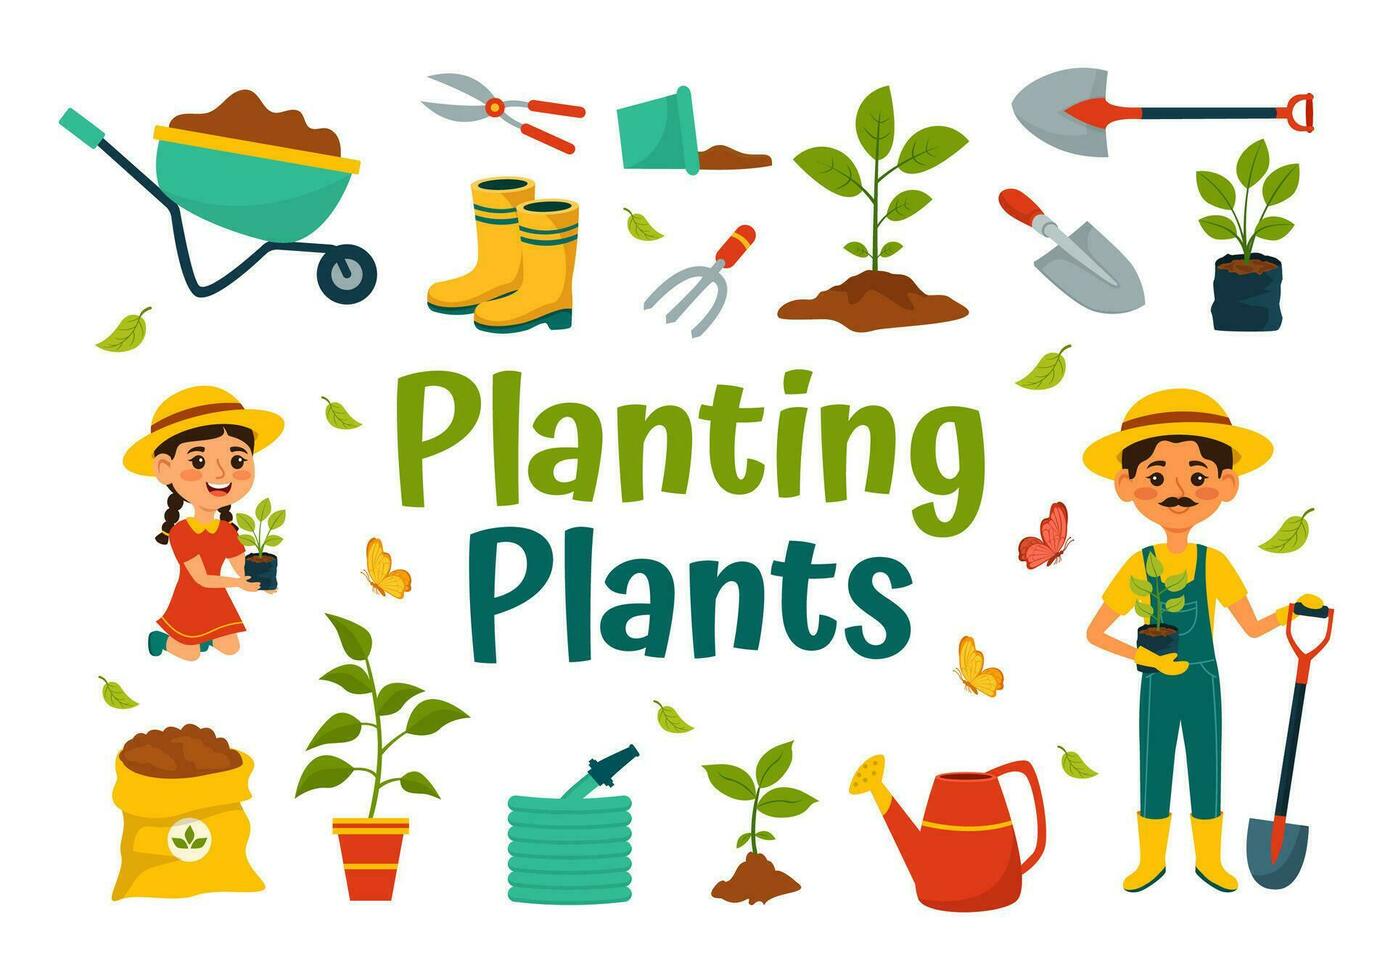 Planting Plants Vector Illustration with People Enjoy Gardening, Plant, Watering or Digging in the Garden in Flat Kids Cartoon Background Design